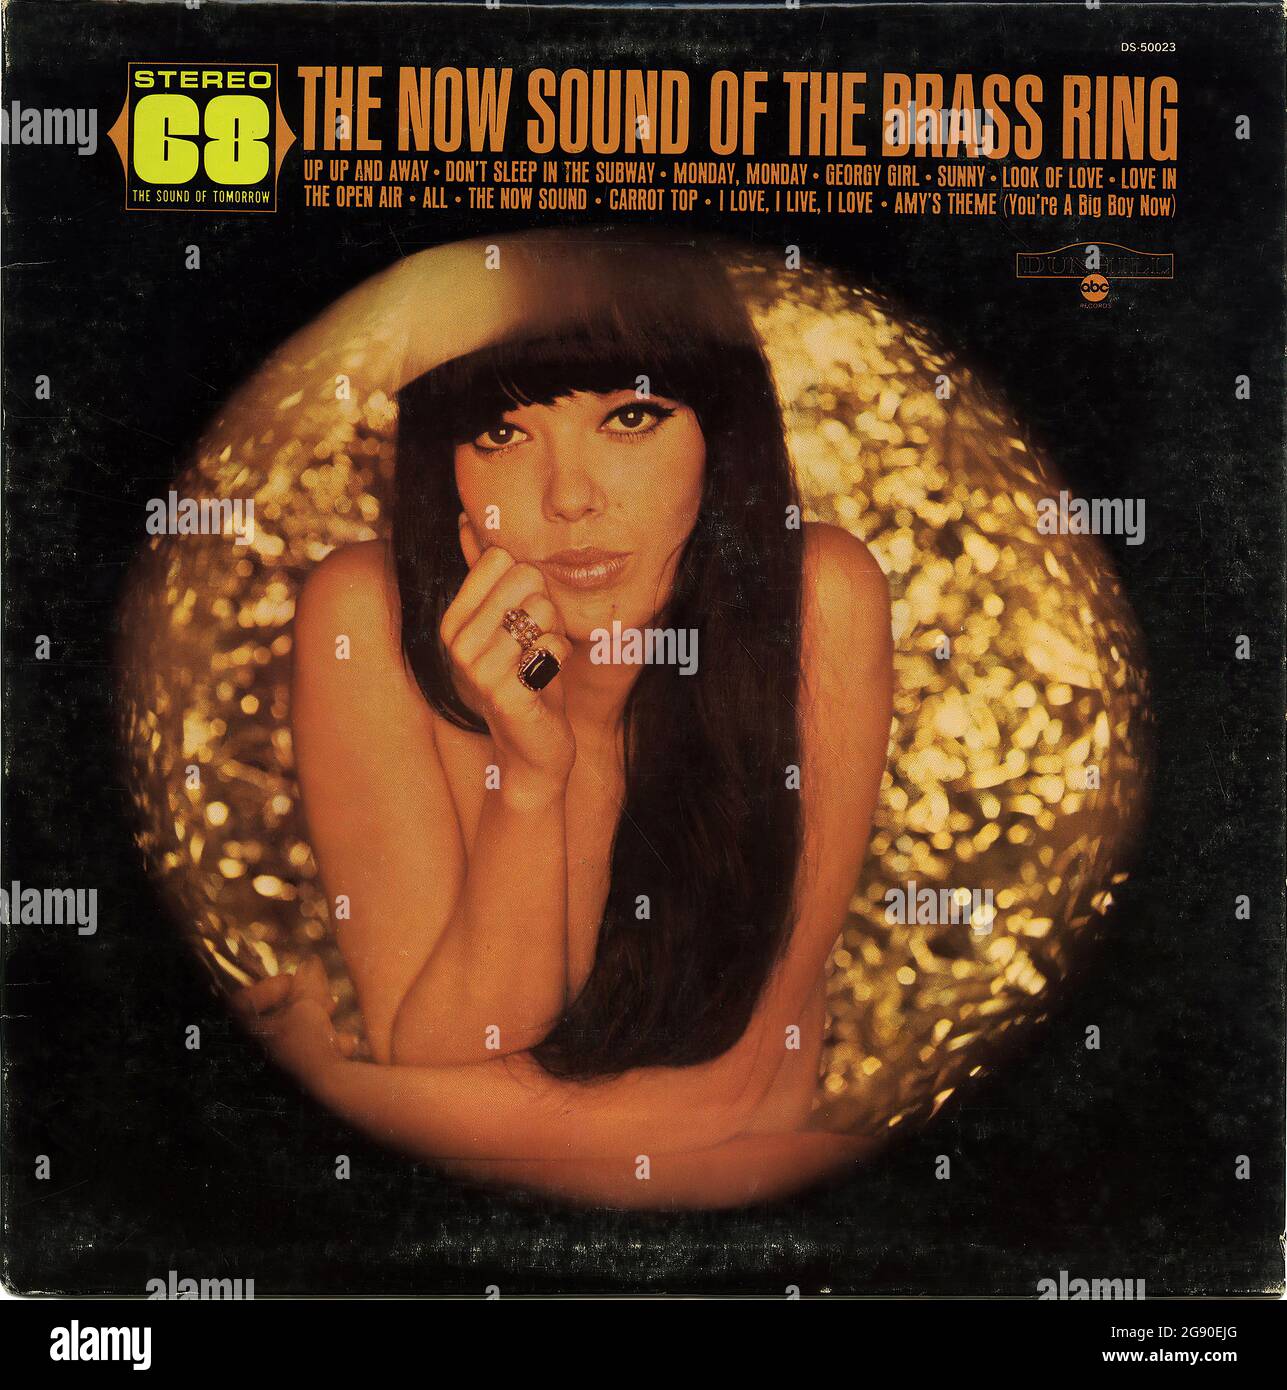 The Now Sound Of The Brass Ring -  Vintage Vinyl Record Cover Stock Photo